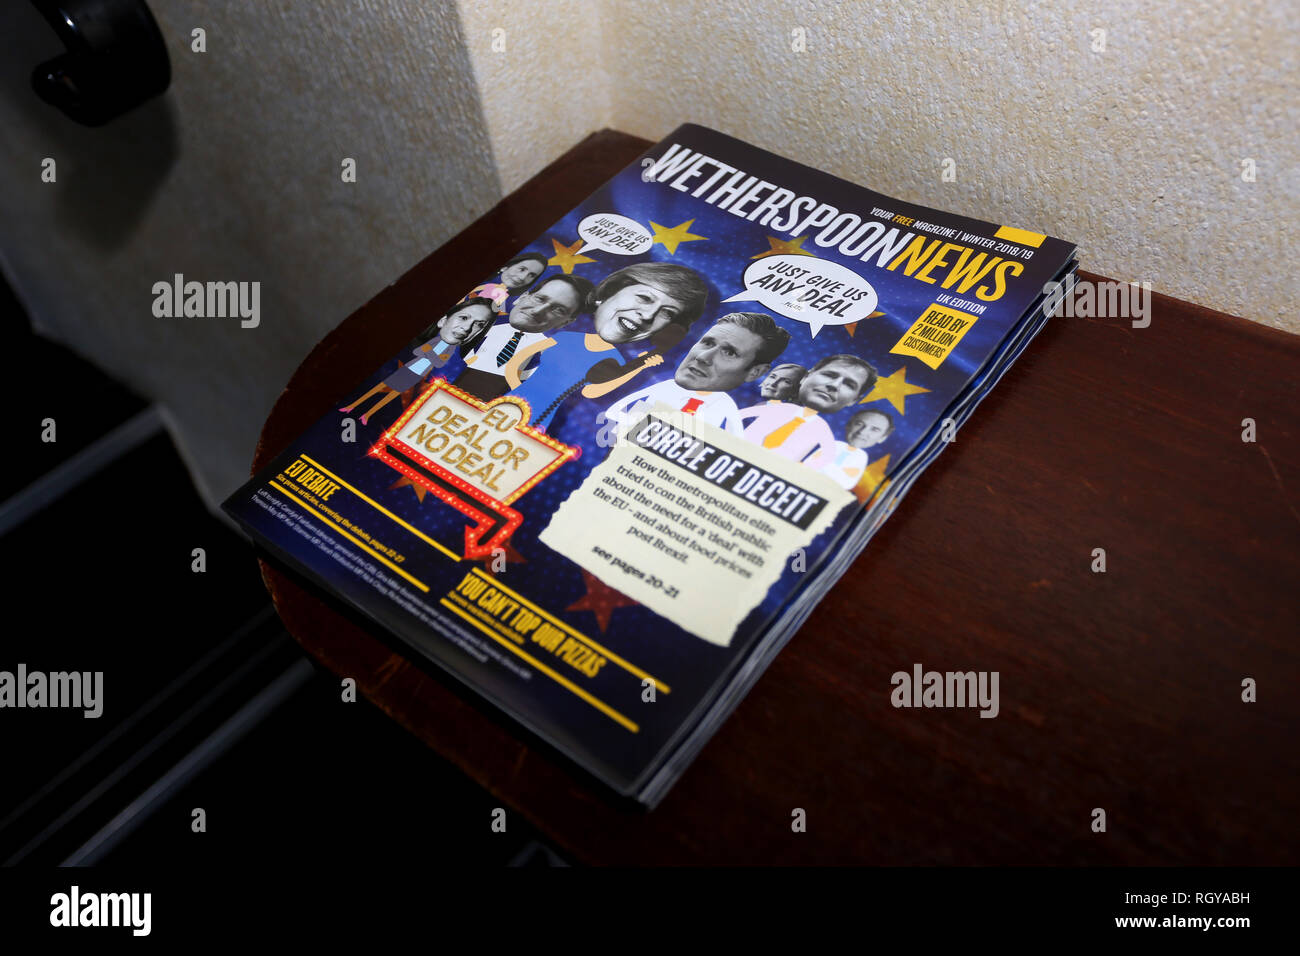 General view of a stack of Weatherspoon News magazines pictured in Bognor Regis, West Sussex, UK. Stock Photo